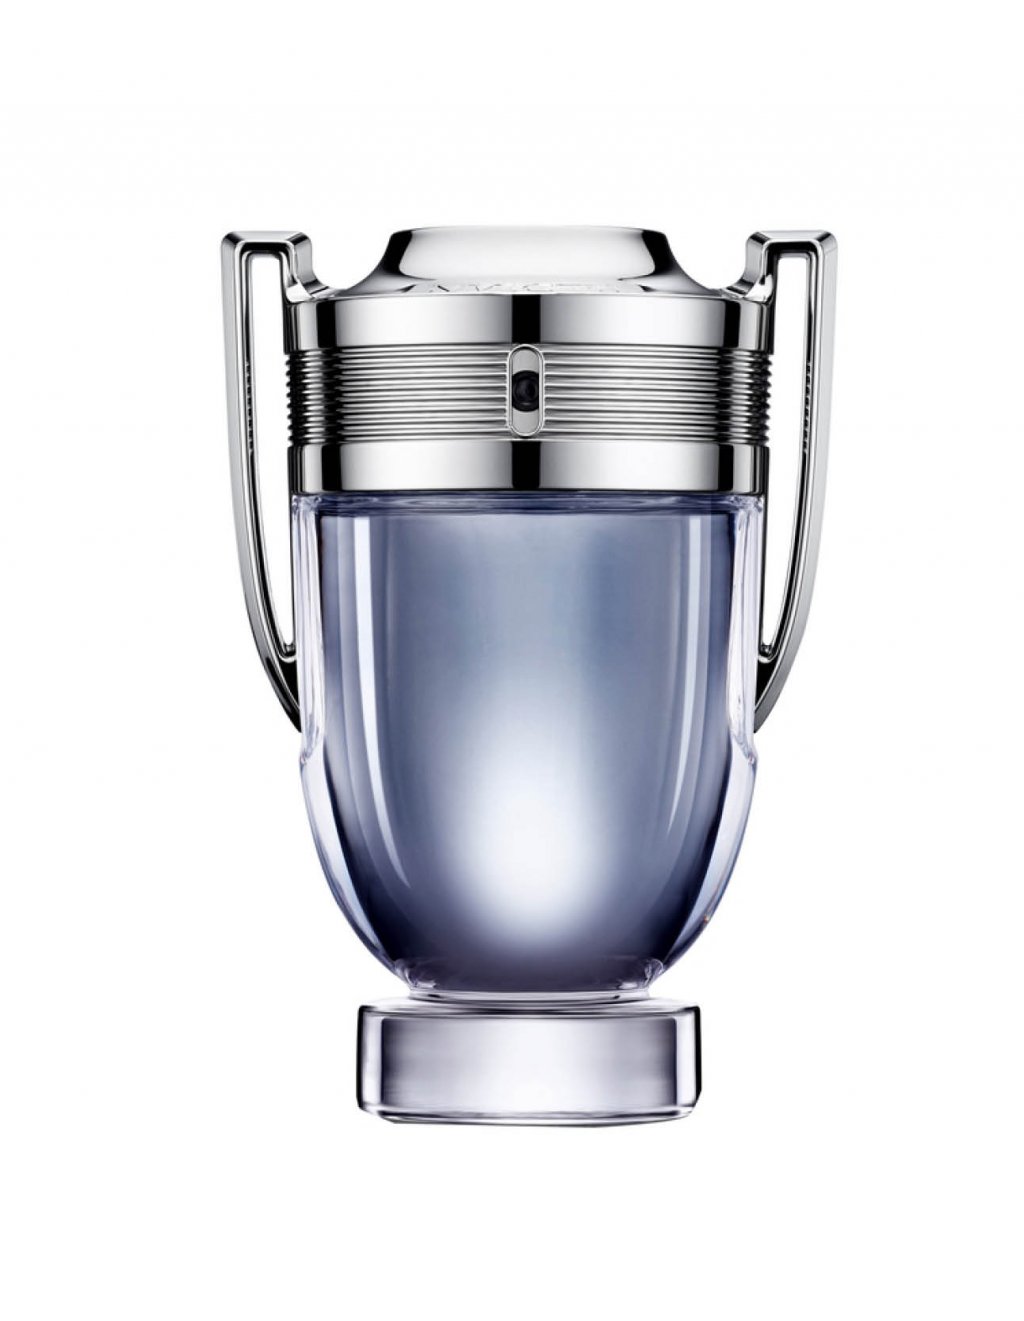 Paco Rabanne, Invictus Who is the God